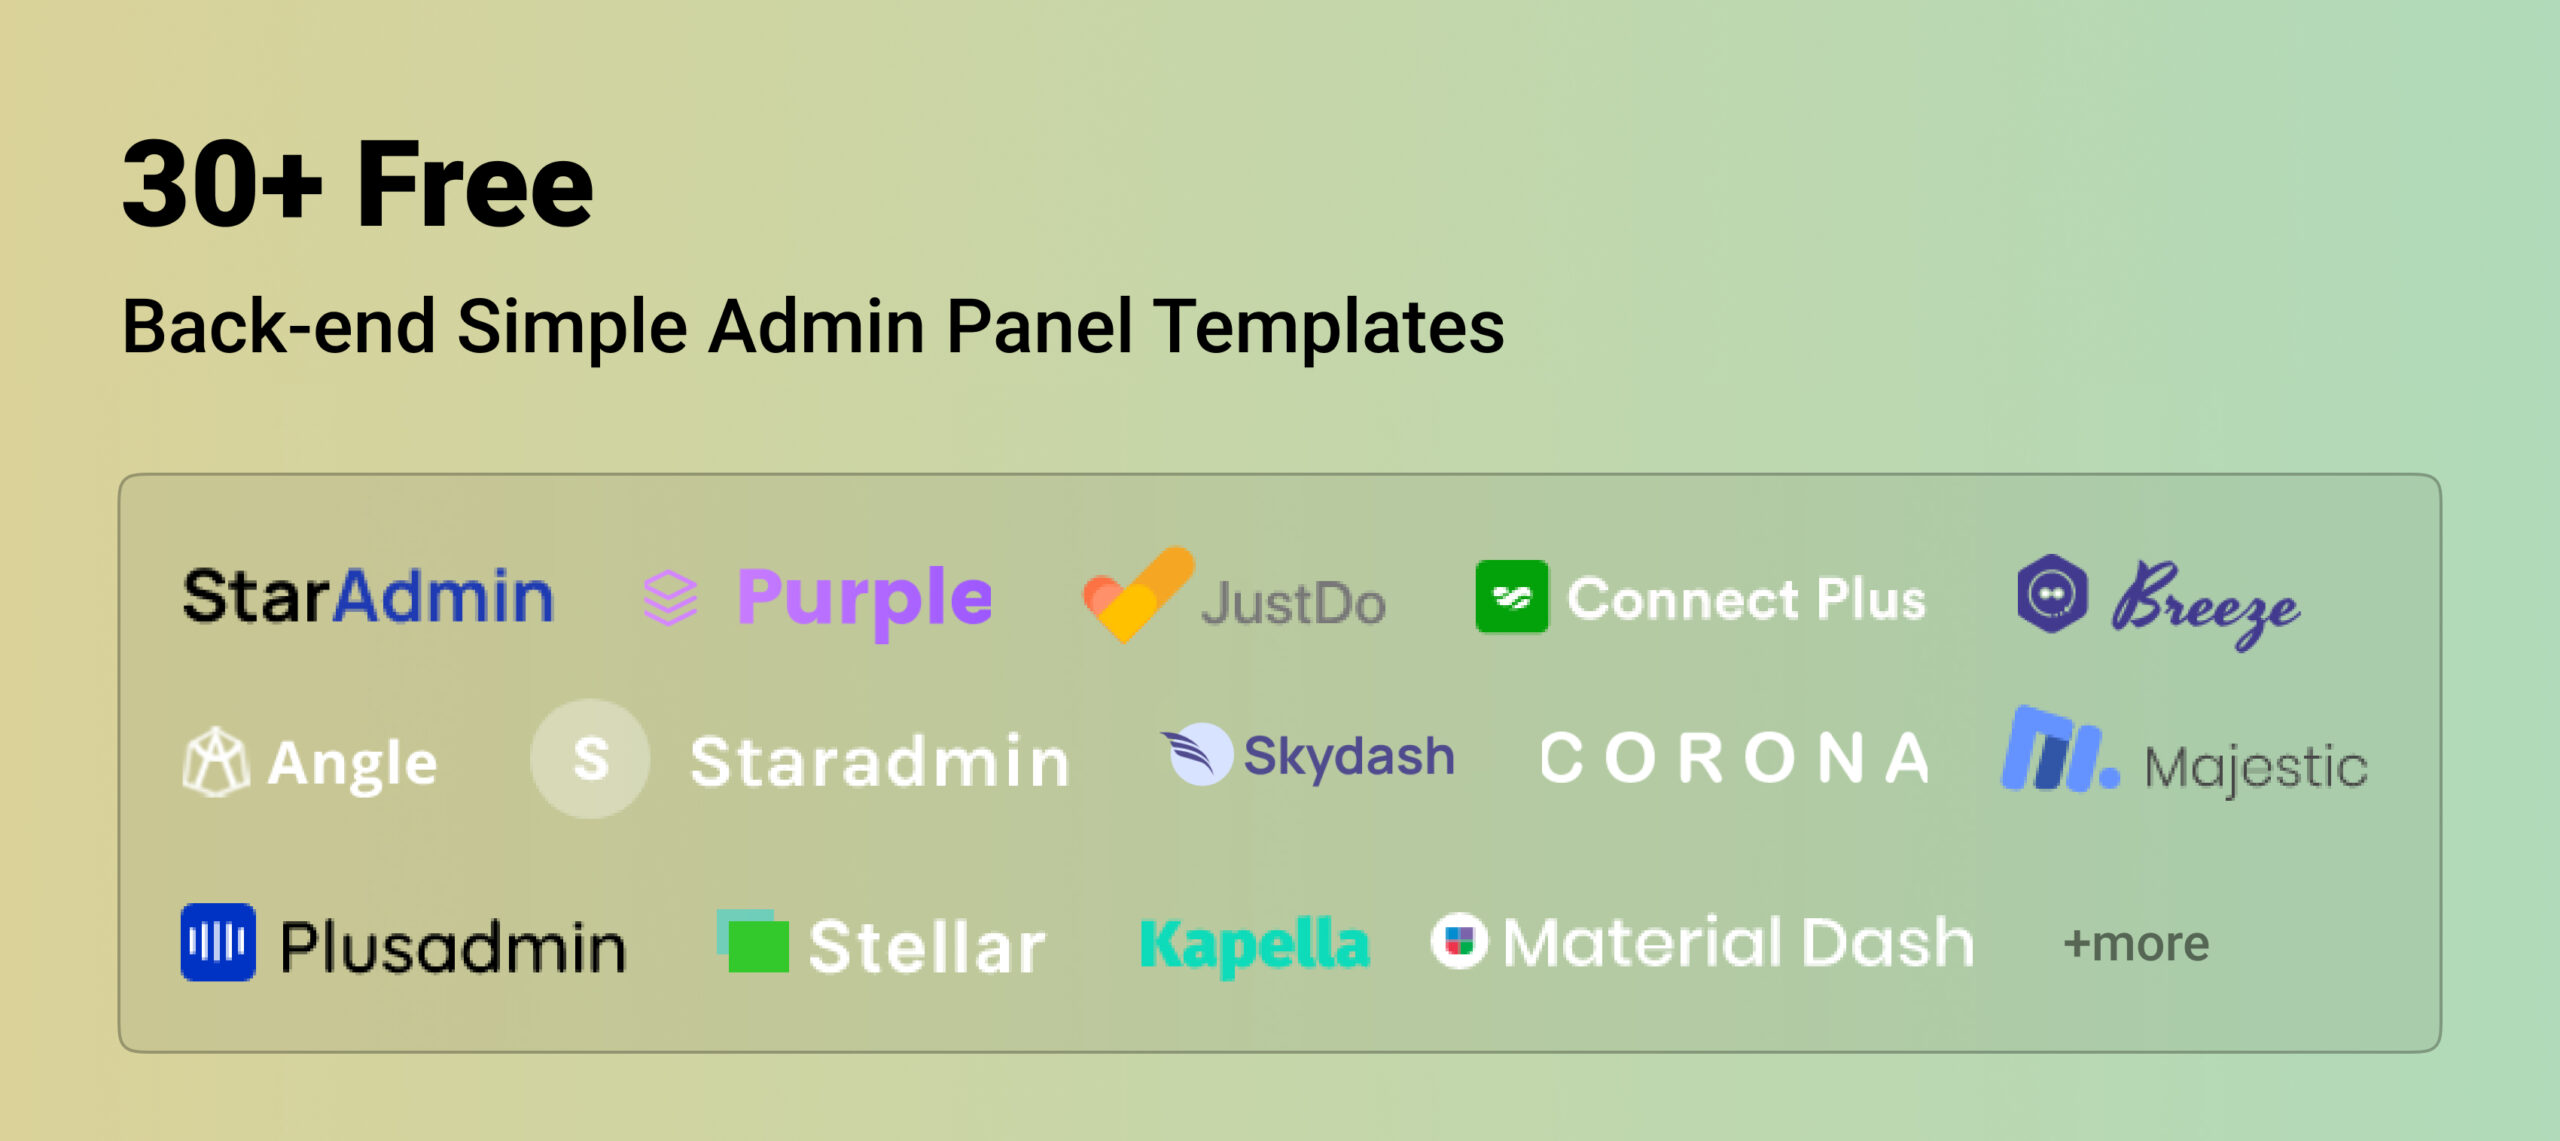  30+ Free Back-end Simple Admin Panel Templates